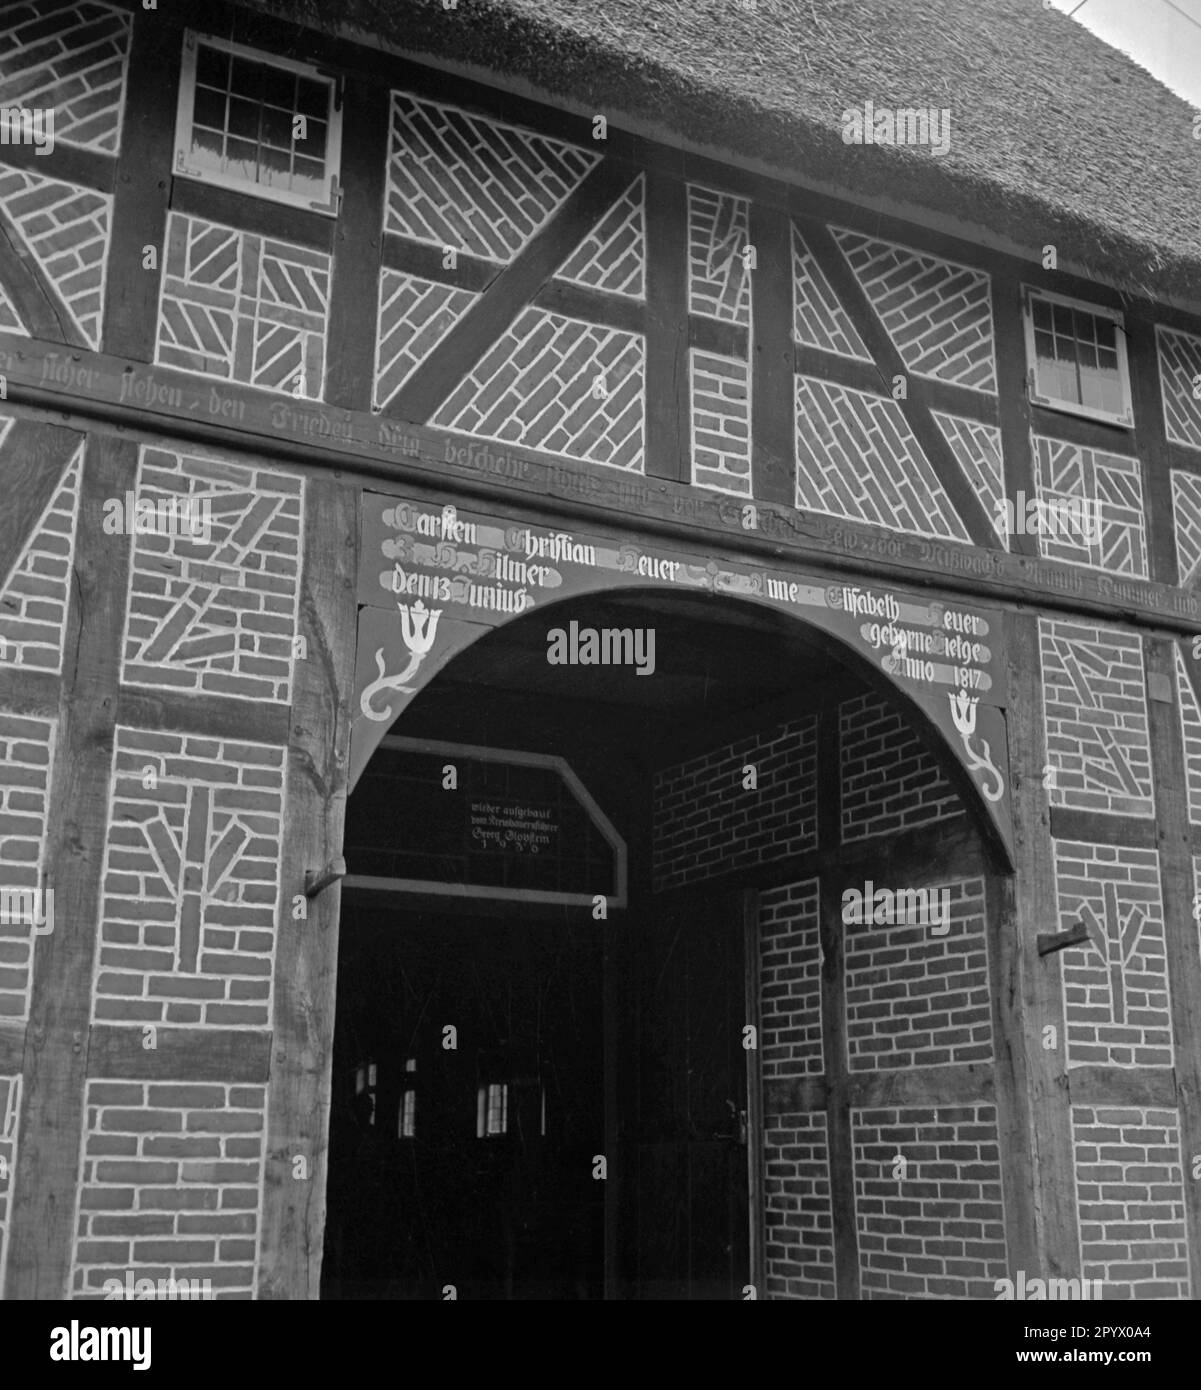 Entrance gate of a half-timber house built in 1817 near Neustrelitz. The framework is decorated with runes. Above the gate in the center, the sig rune. Left and right (from top to bottom): Swastika, Wolfsangel and Lebensrune (sig rune). Undated photo. Stock Photo